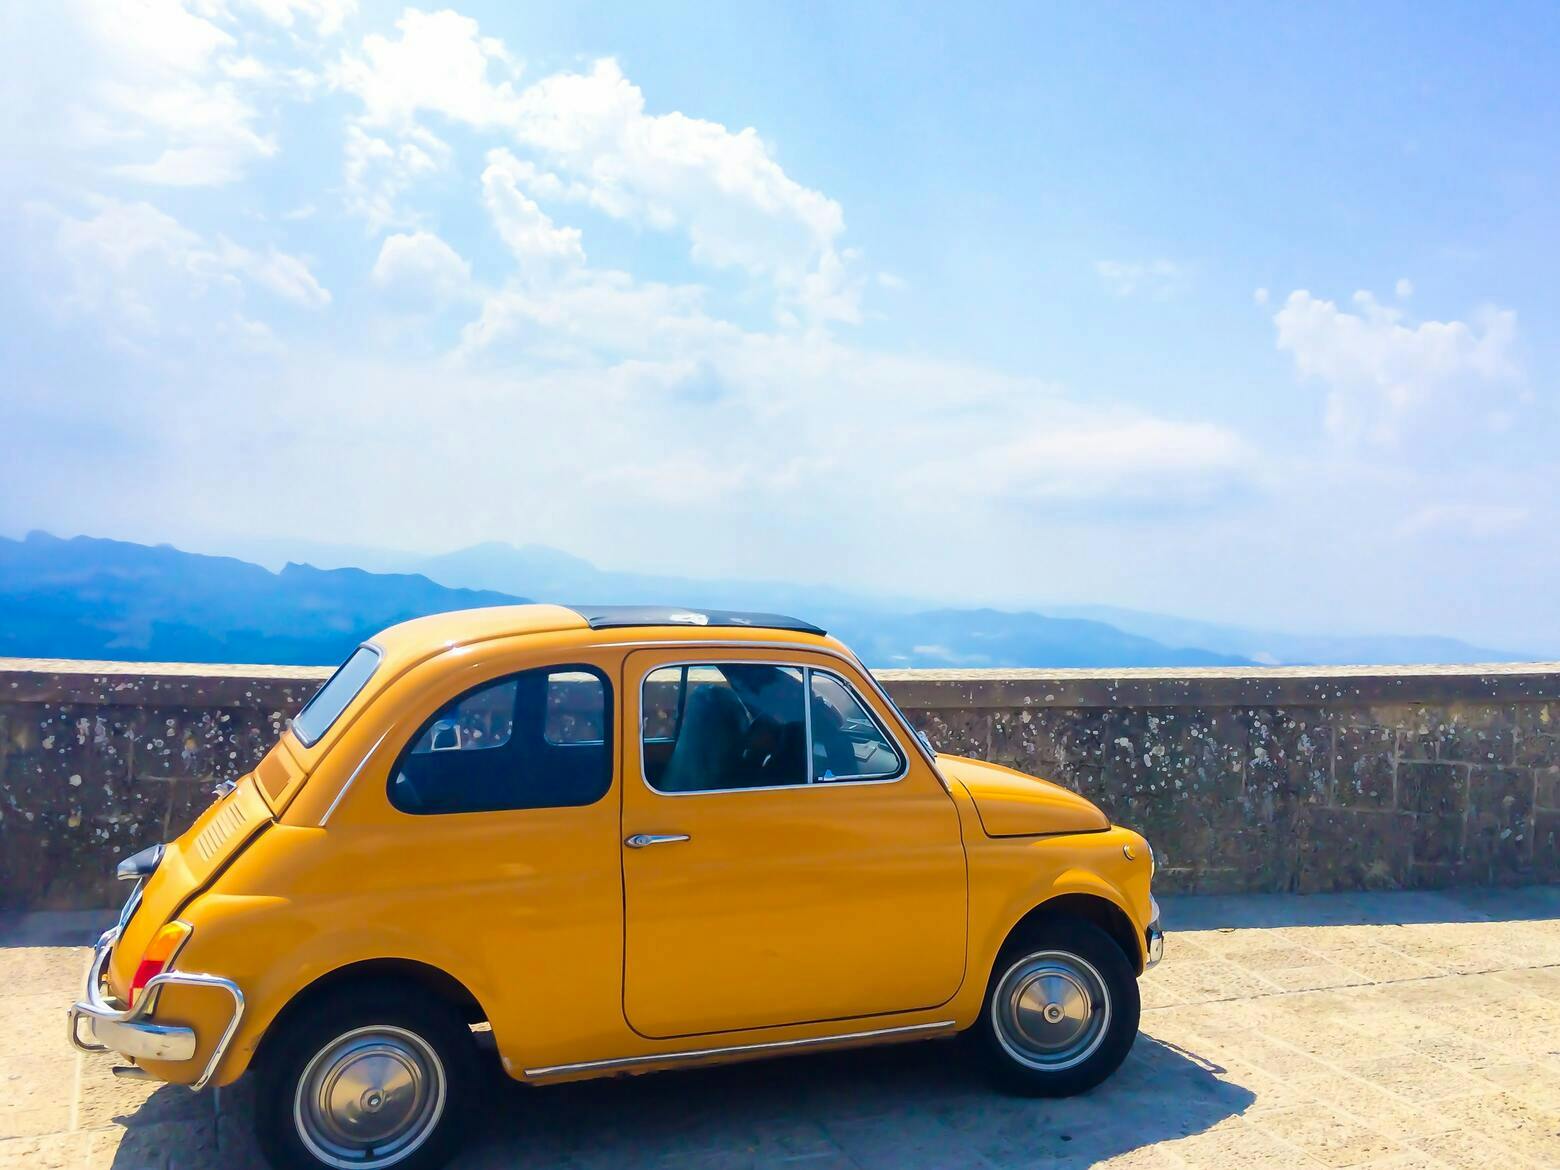 A yellow Fiat 500 is park in front of a low wall overlooking a wide vista with blue sky.